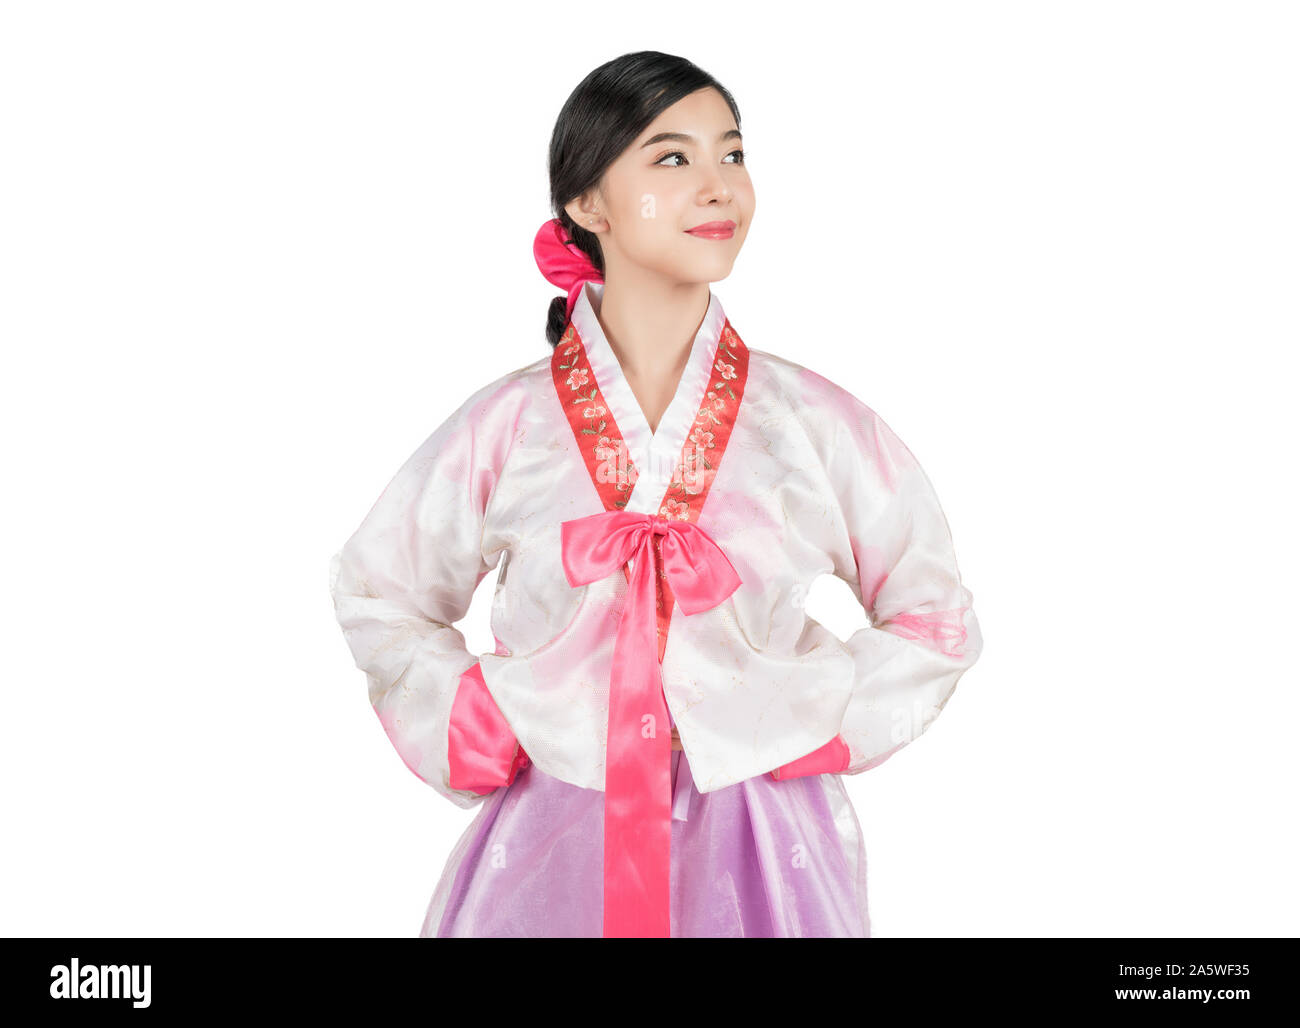 Portrait of young attractive Korean Woman with Hanbok, the traditional Korean dress smiling with white background with clipping path feeling confident Stock Photo